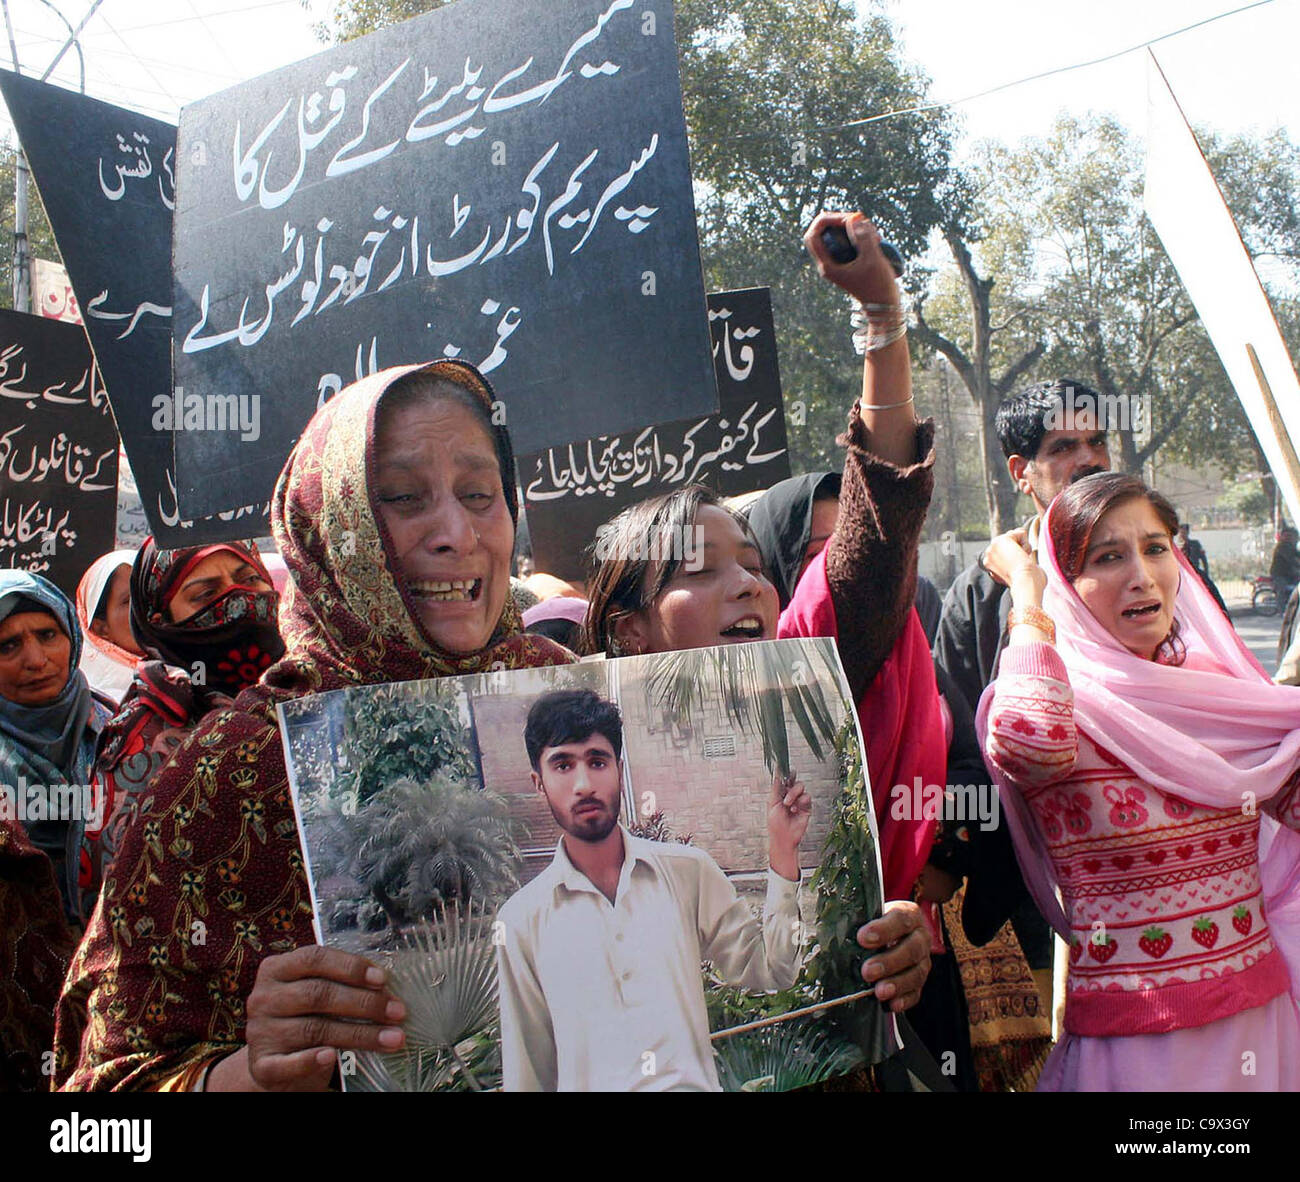 A woman resident of Wazirabad Tehsil Gujranwala District holds picture of Muhammad Shoaib as they are protesting against his killing, in Lahore on Monday, February 27, 2012. Stock Photo